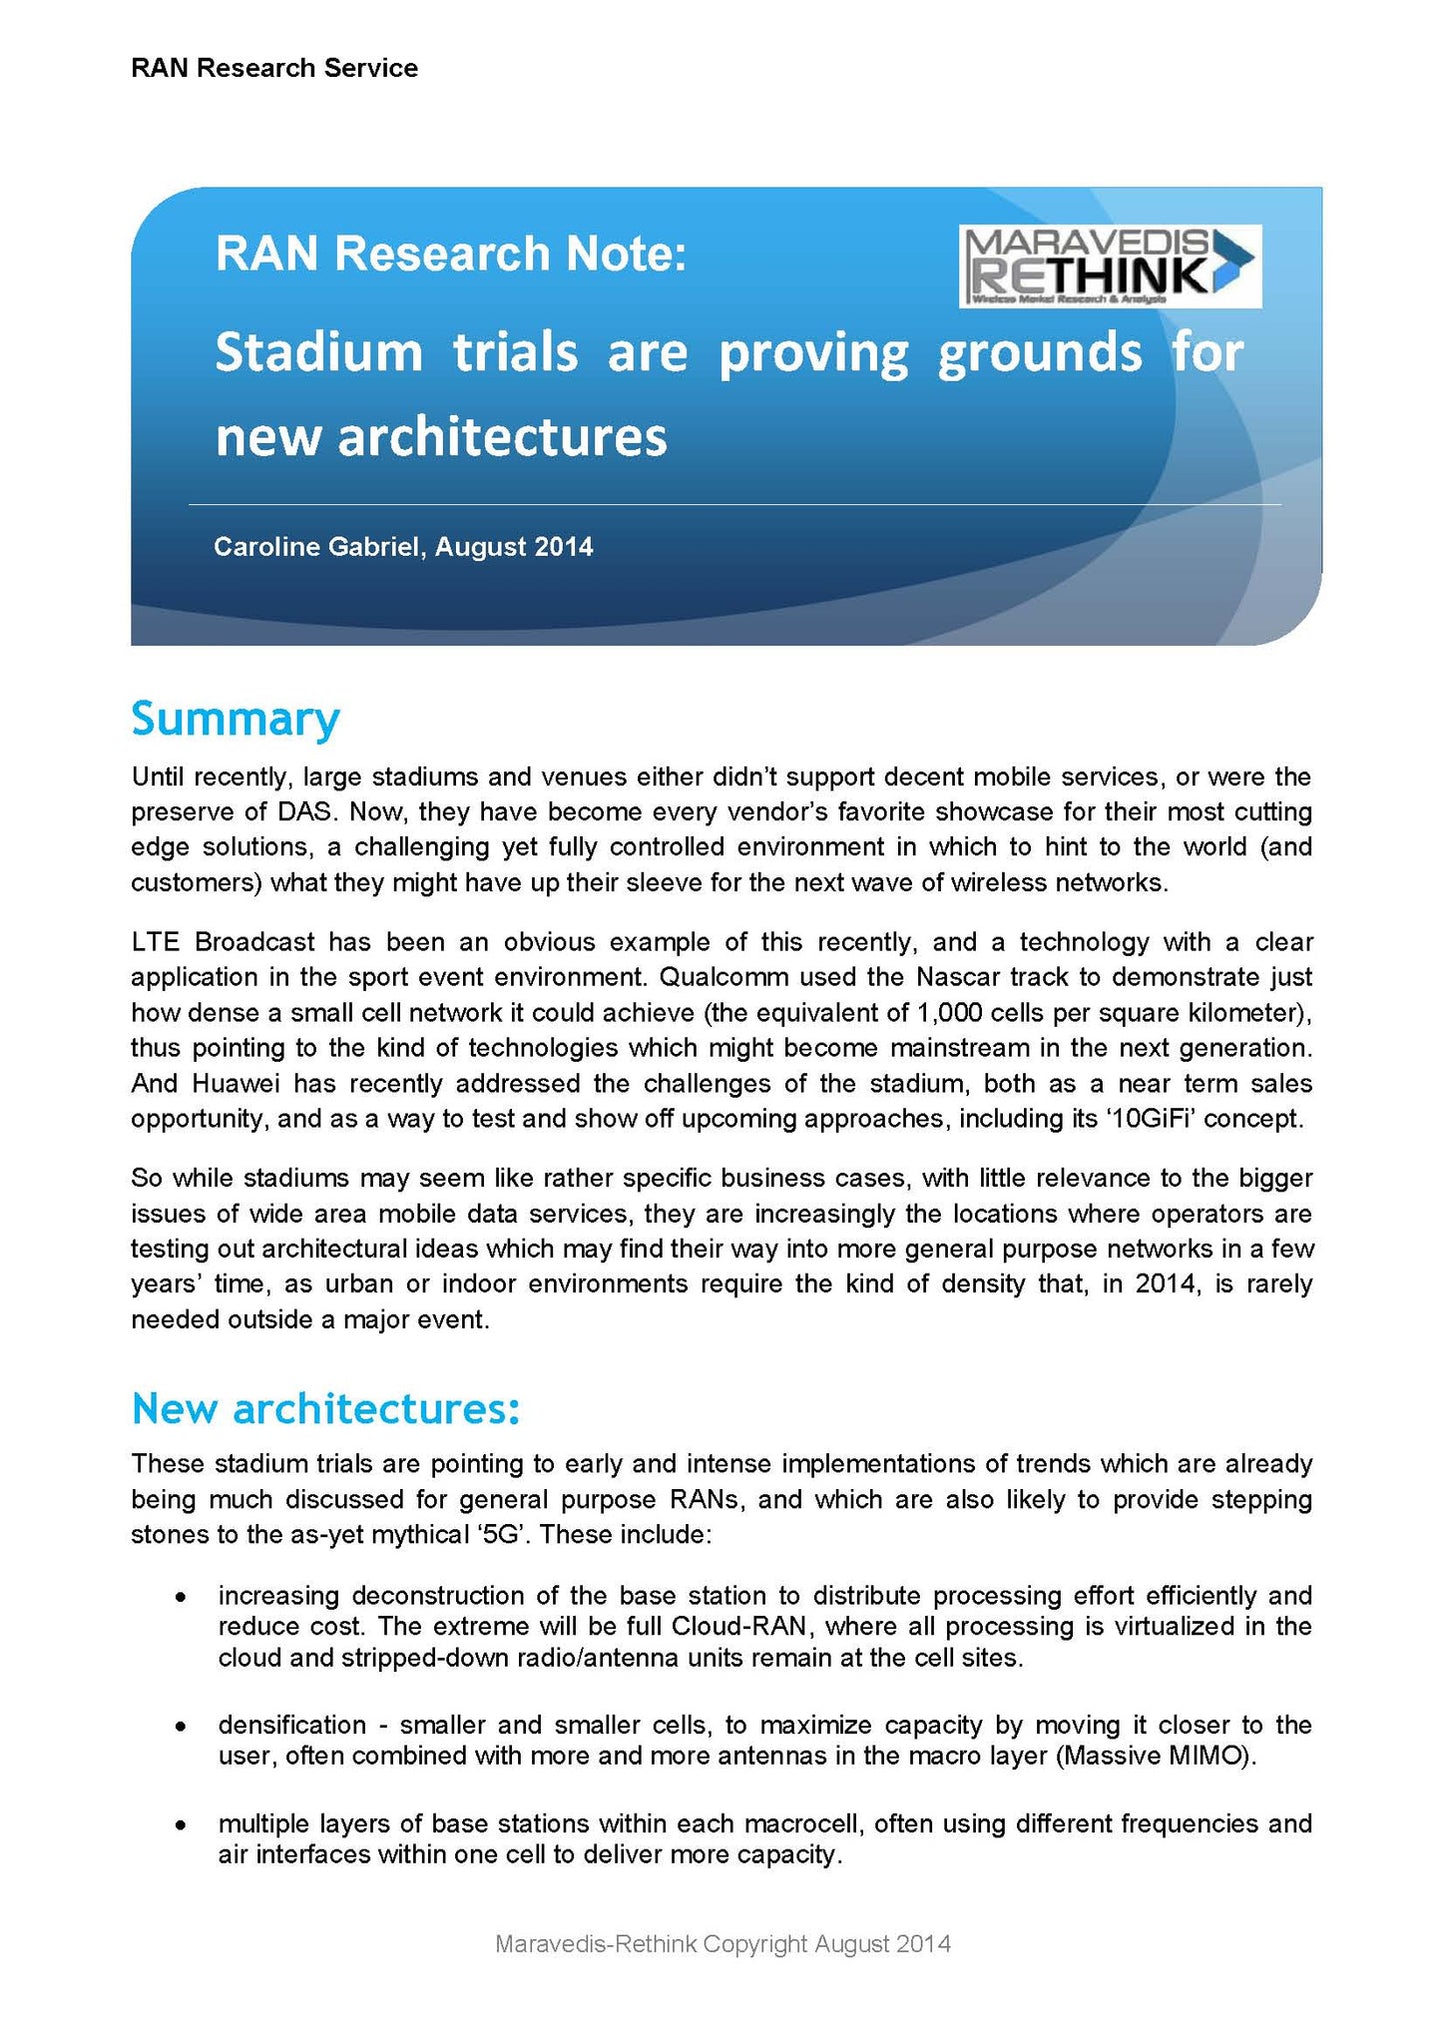 RAN Research Note: Stadium trials are proving grounds for new architectures